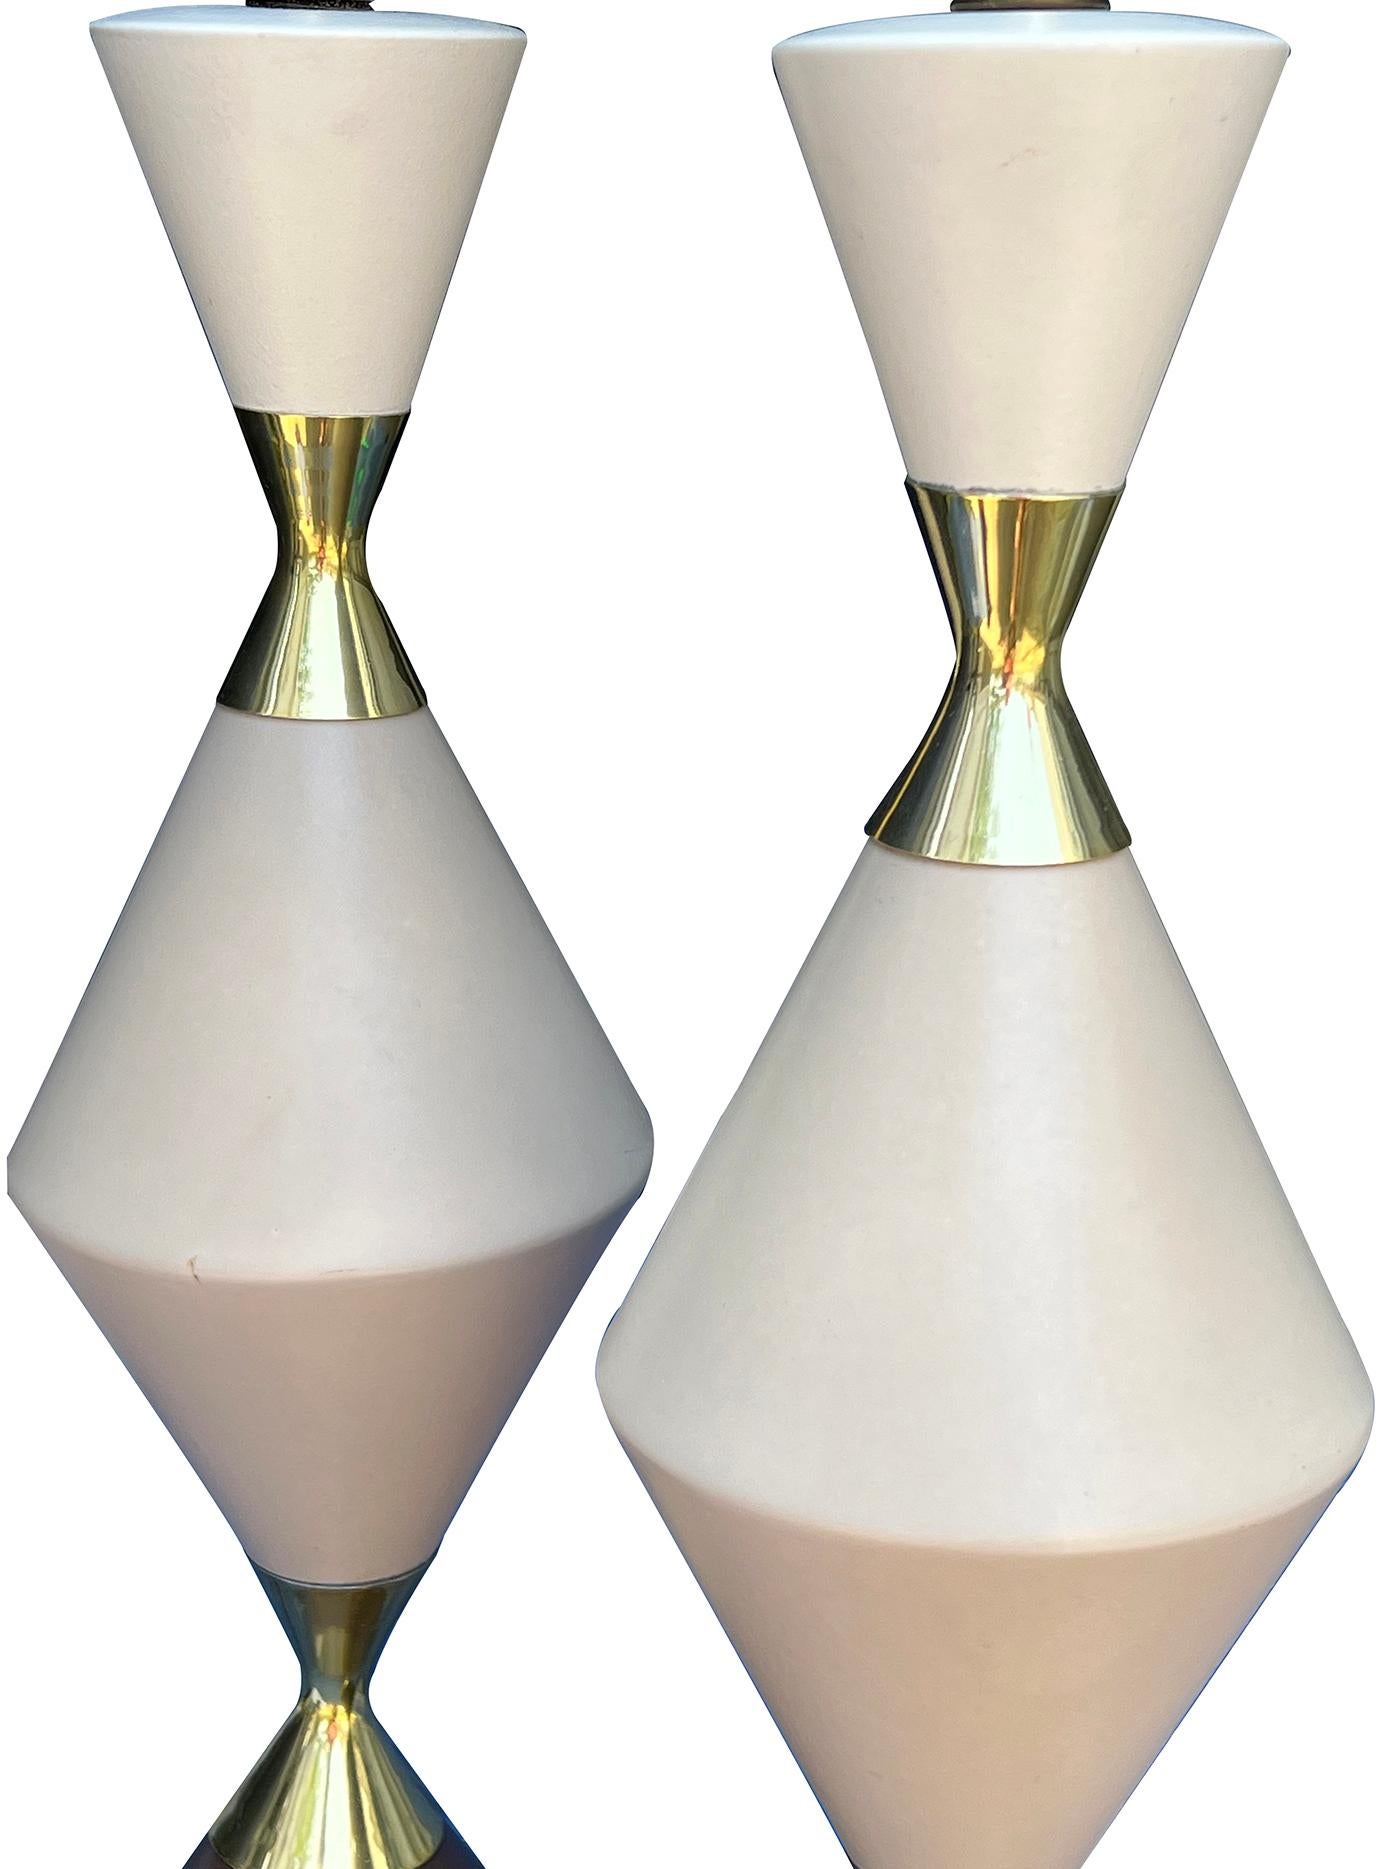 Pair of Gerald Thurston 1950s Hourglass Tri-color Ceramic Lamps In Good Condition For Sale In San Francisco, CA